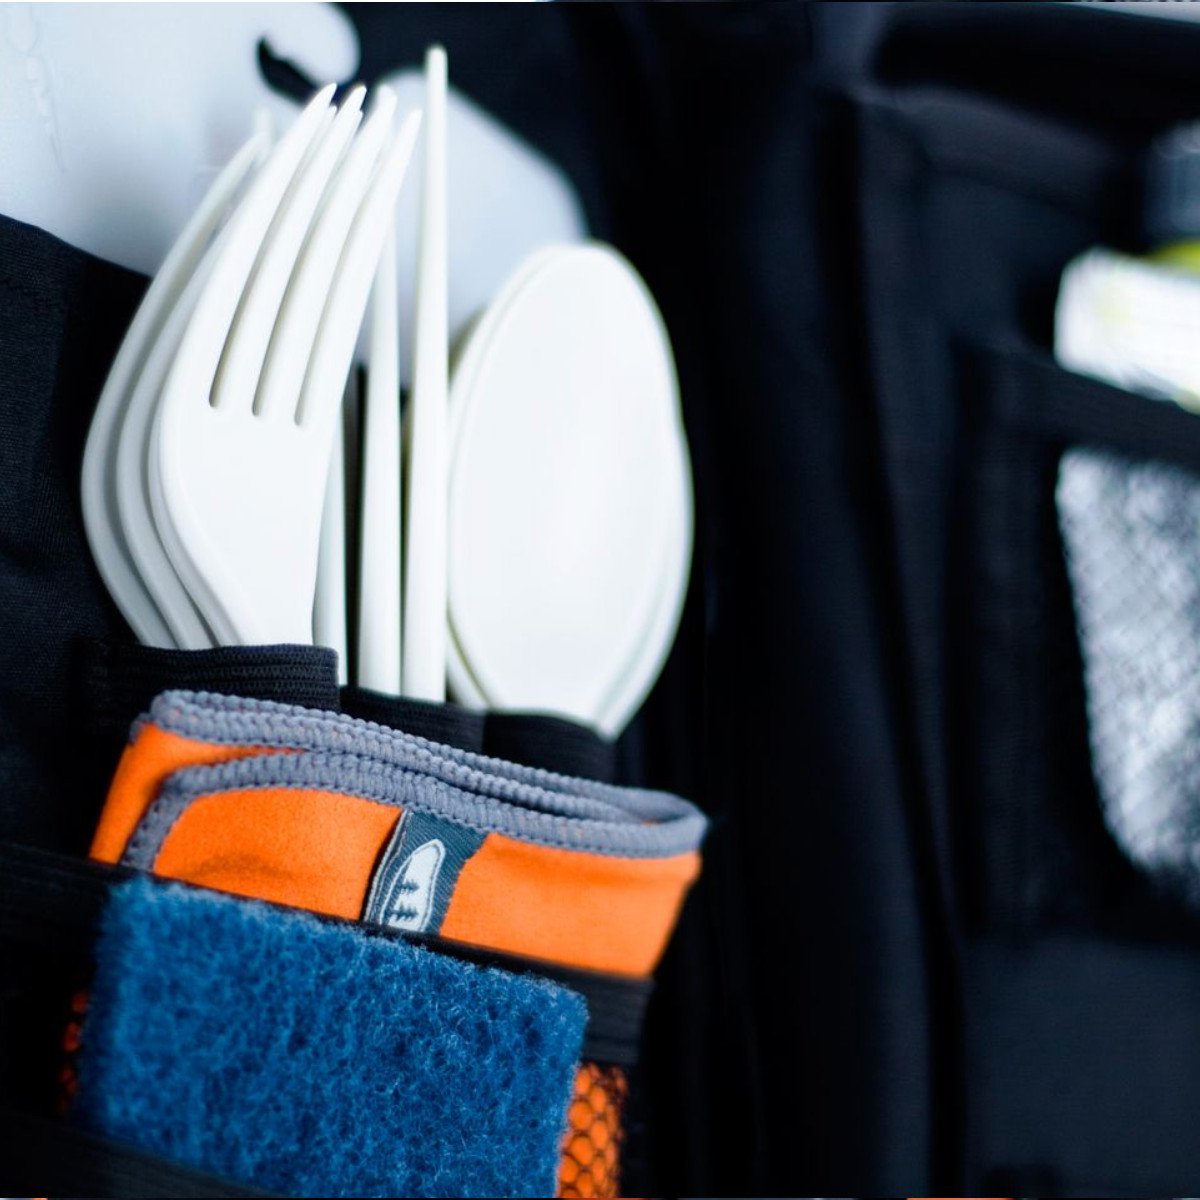 Camping cutlery inside the GSI Destination kitchen set